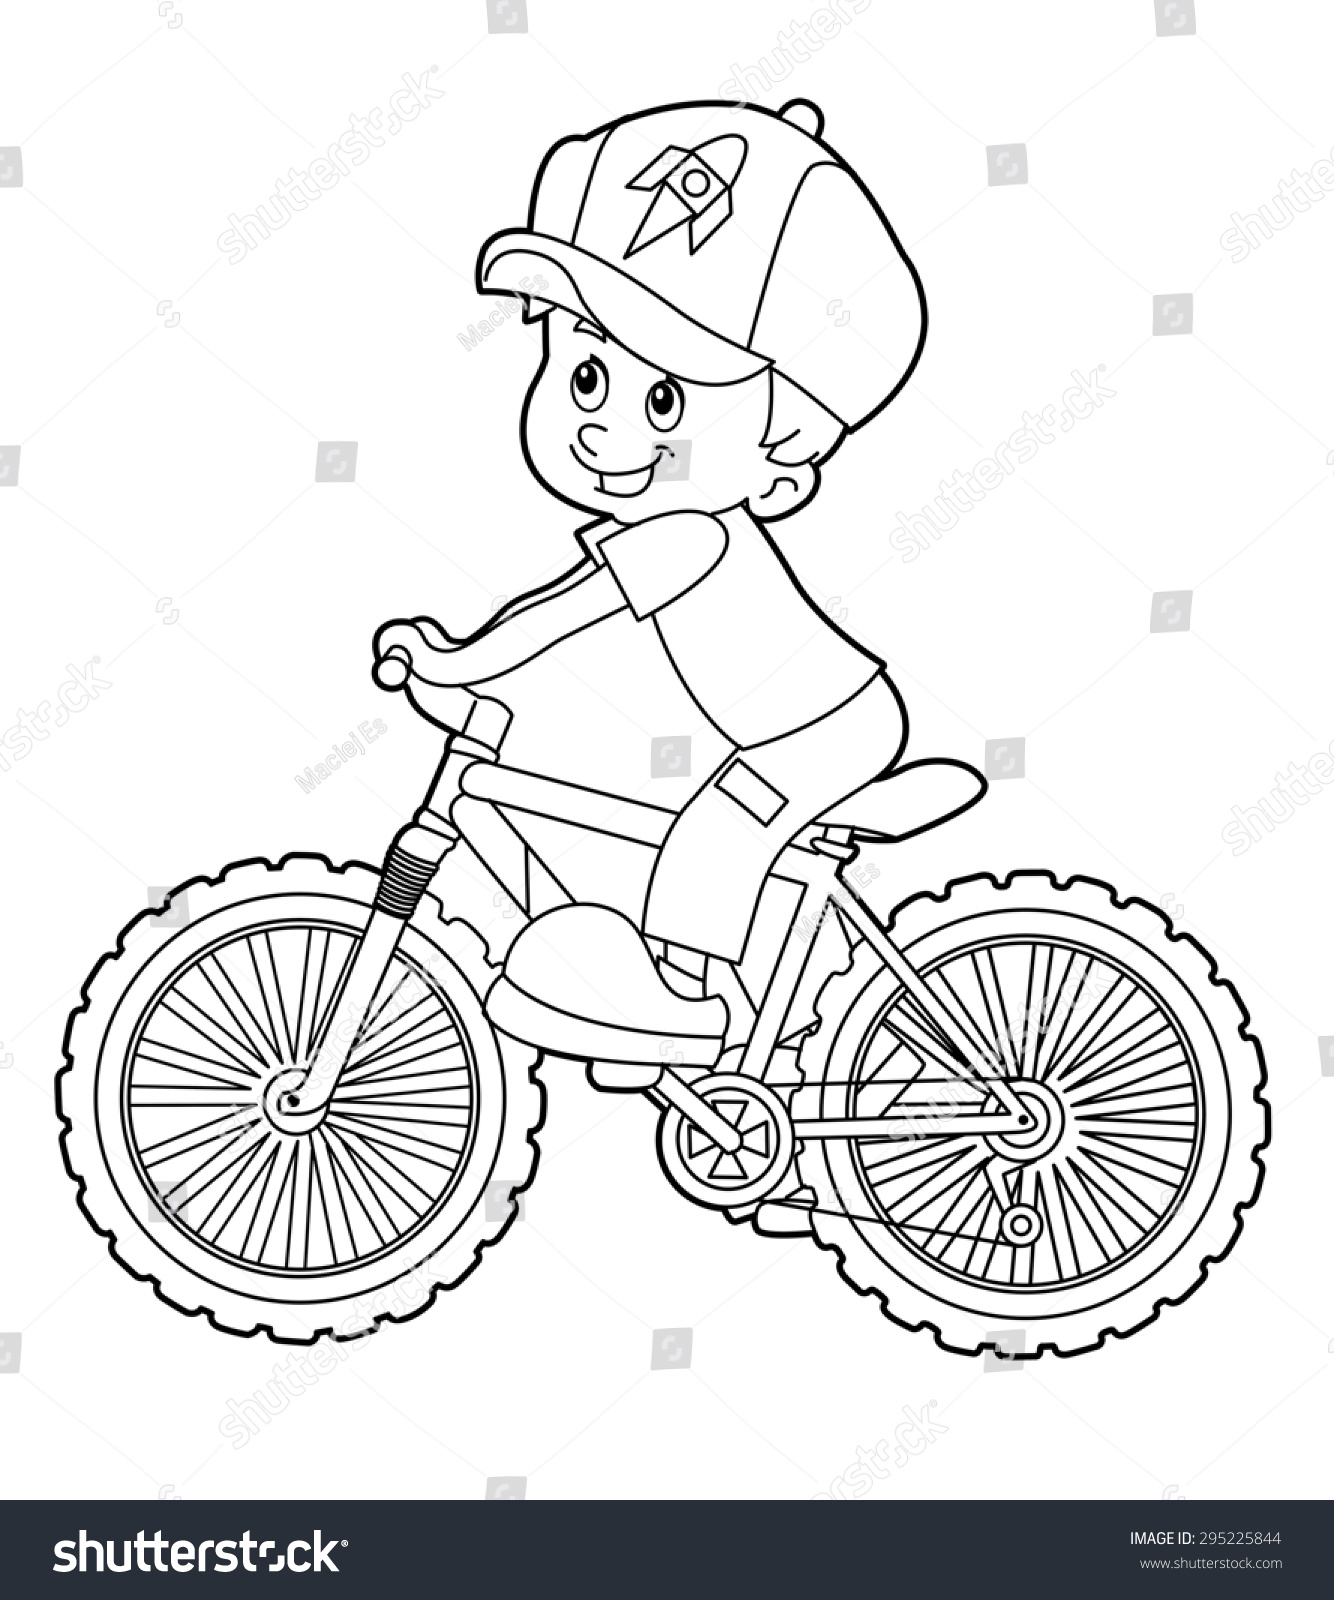 Cartoon Kid Riding Bicycle Coloring Page Stock Illustration 24